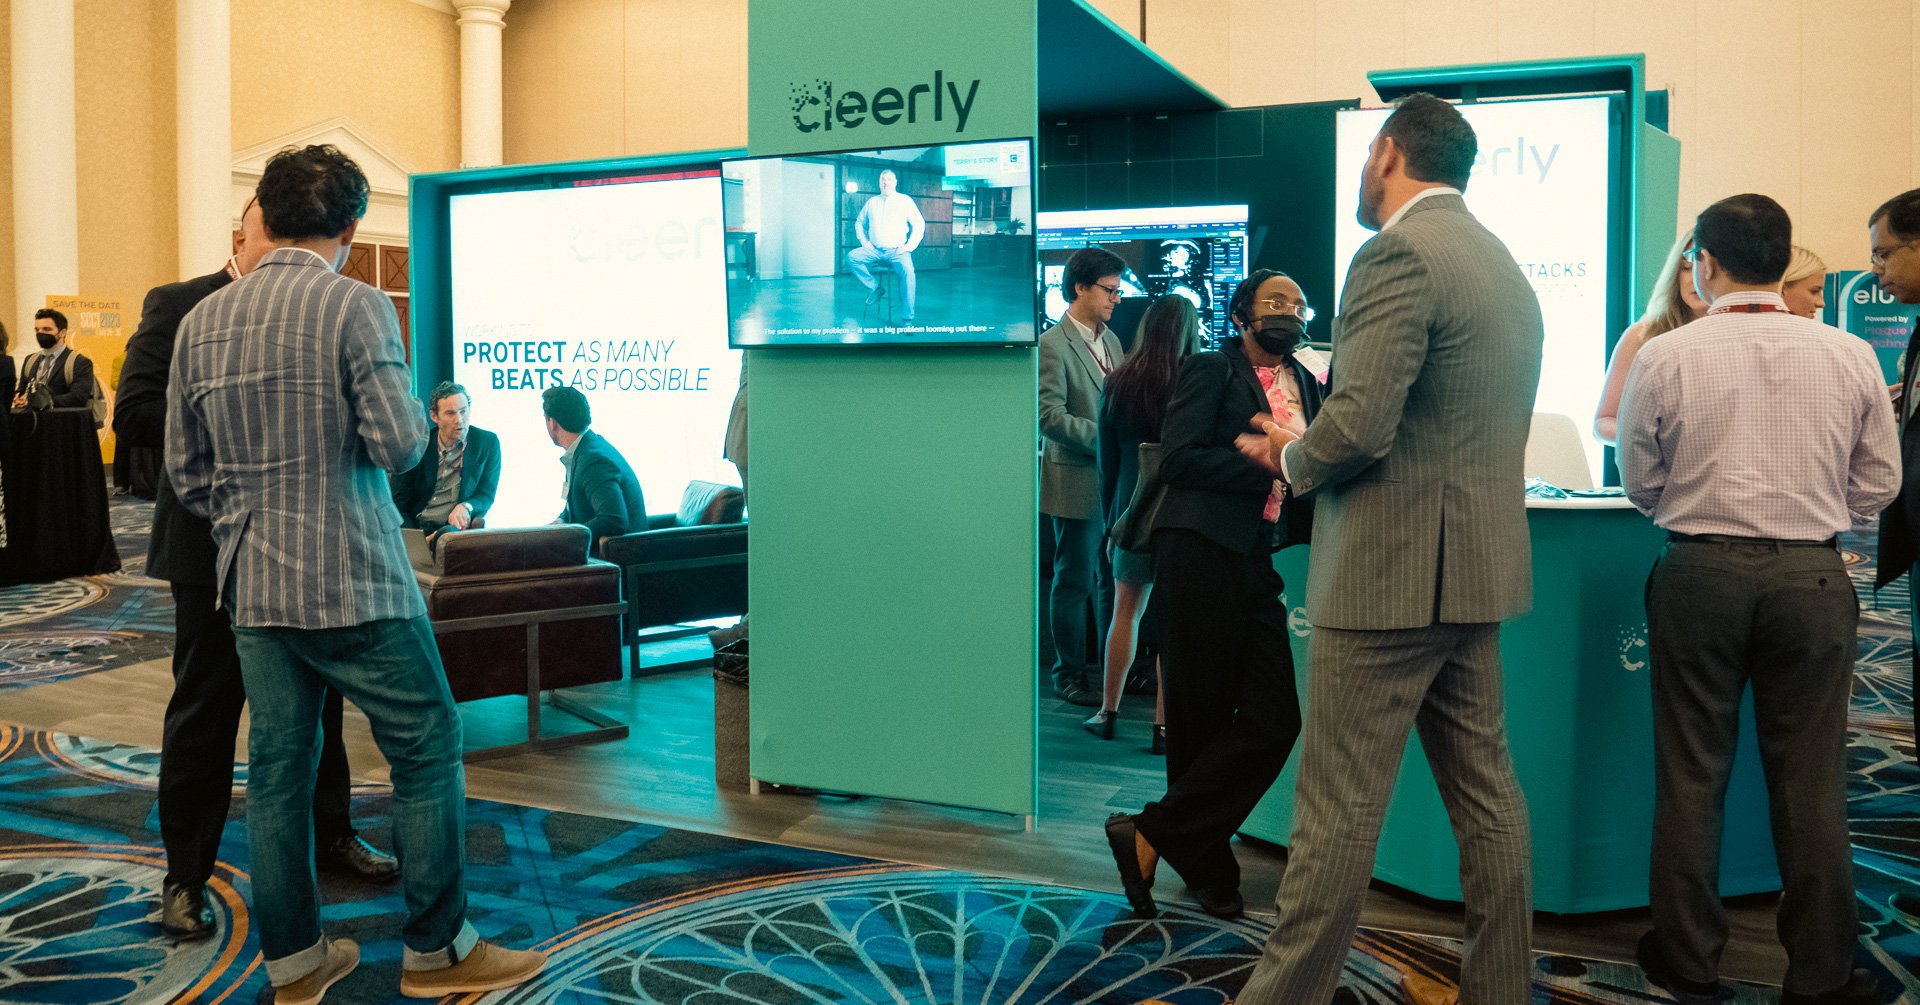 Cleerly at SCCT 2022 - Exhibit Hall